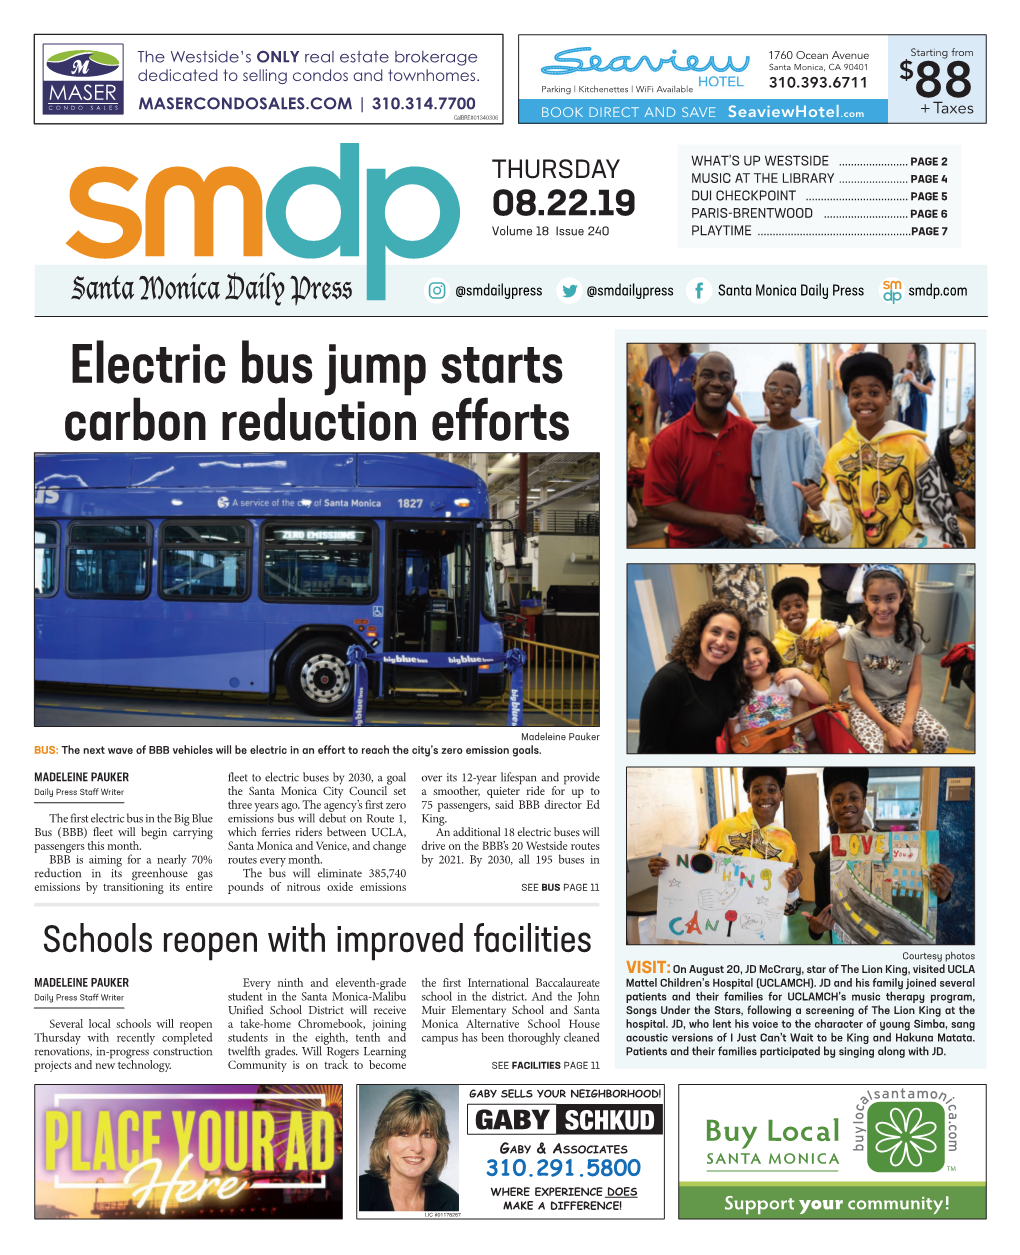 Electric Bus Jump Starts Carbon Reduction Efforts